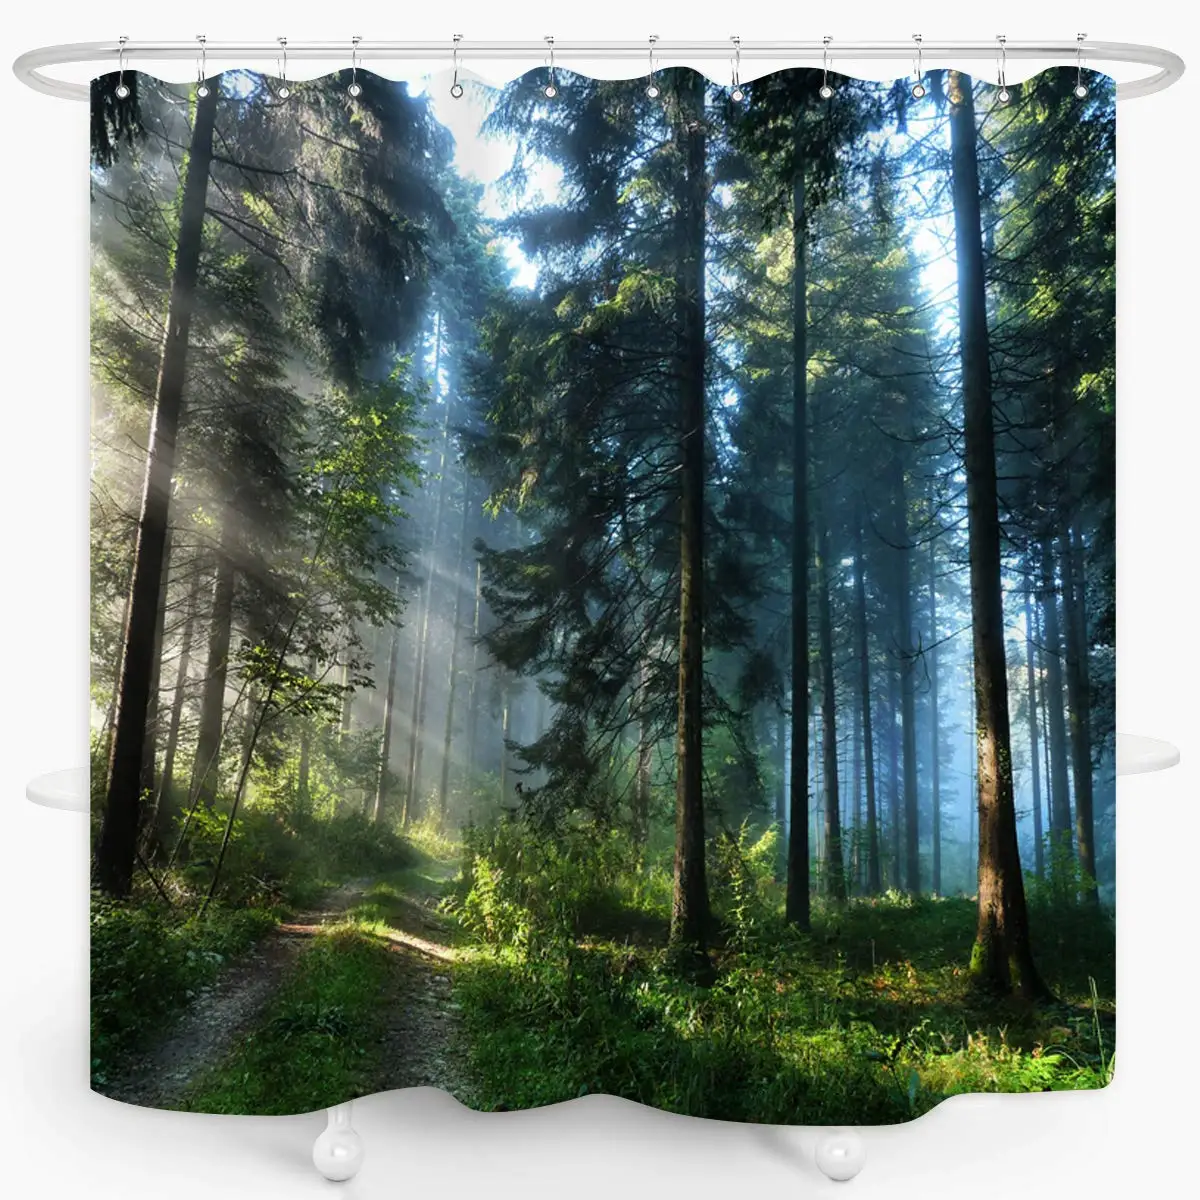 

Woodland Trees Forest Sunlight Shower Curtain Sunshine Attractive Nature Landscape Waterproof Fabric Bathroom Decor with Hooks